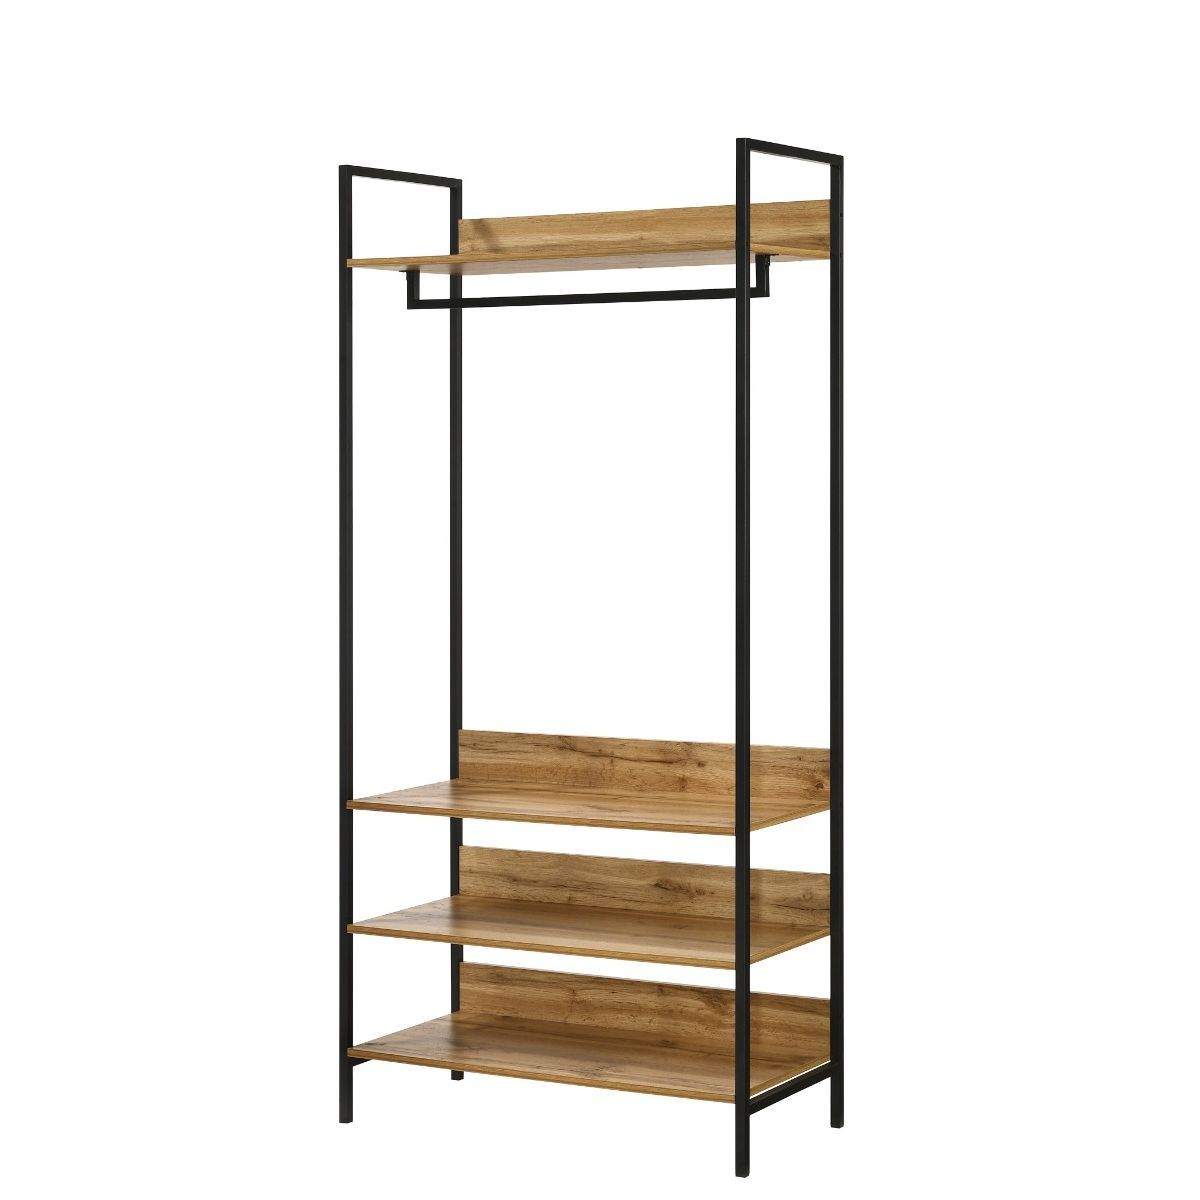 Wardrobes With 4 Shelves Within Favorite Open Wardrobe With 4 Shelves (View 8 of 10)